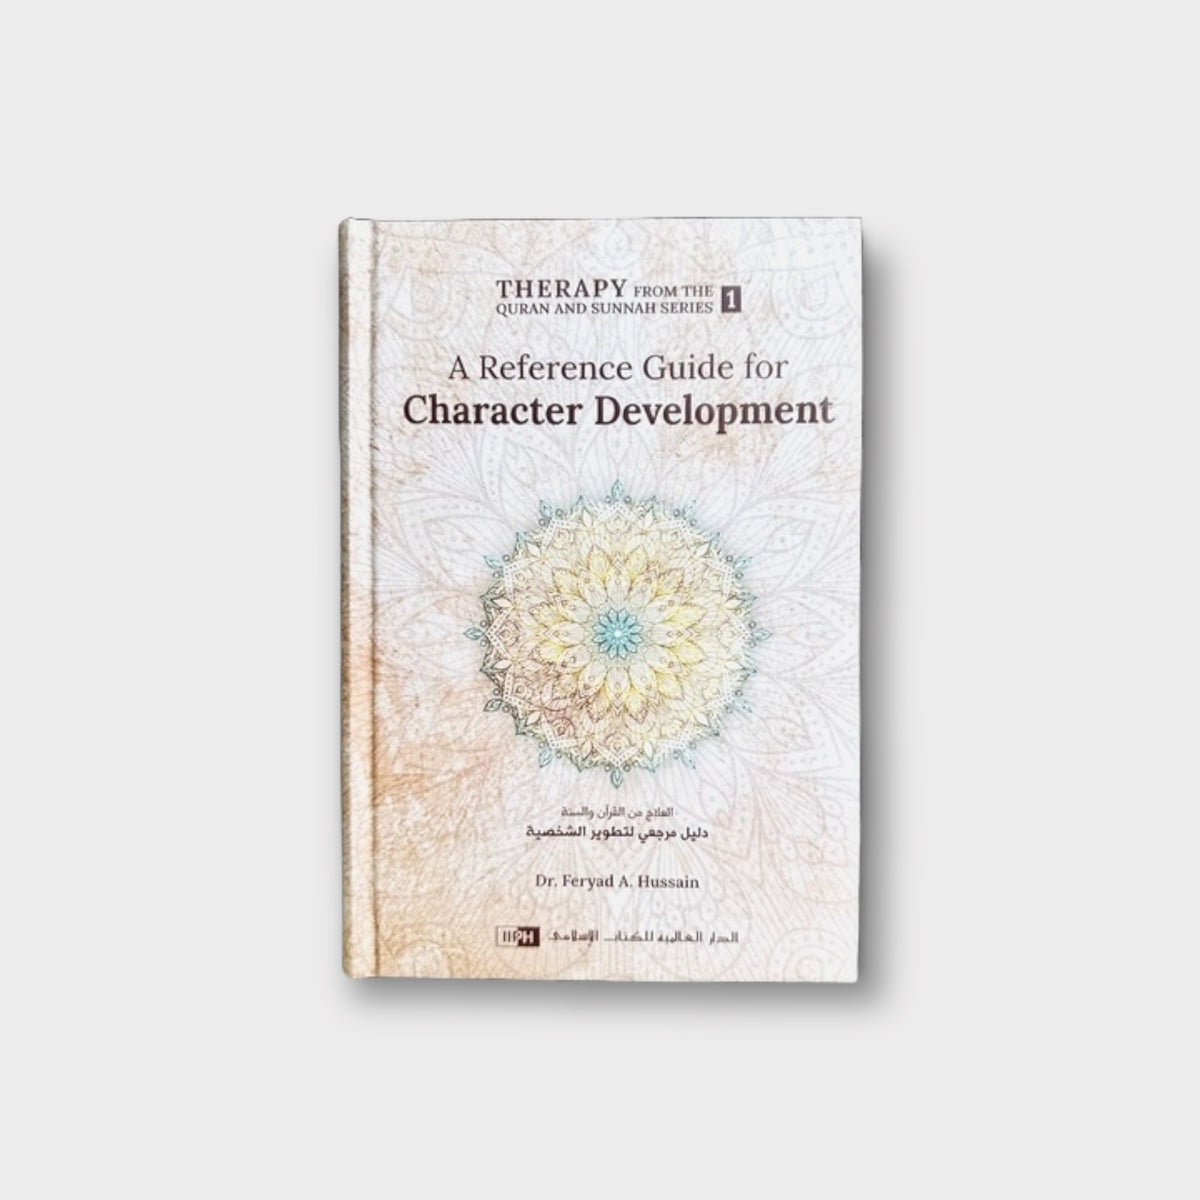 A Reference Guide for Character Development